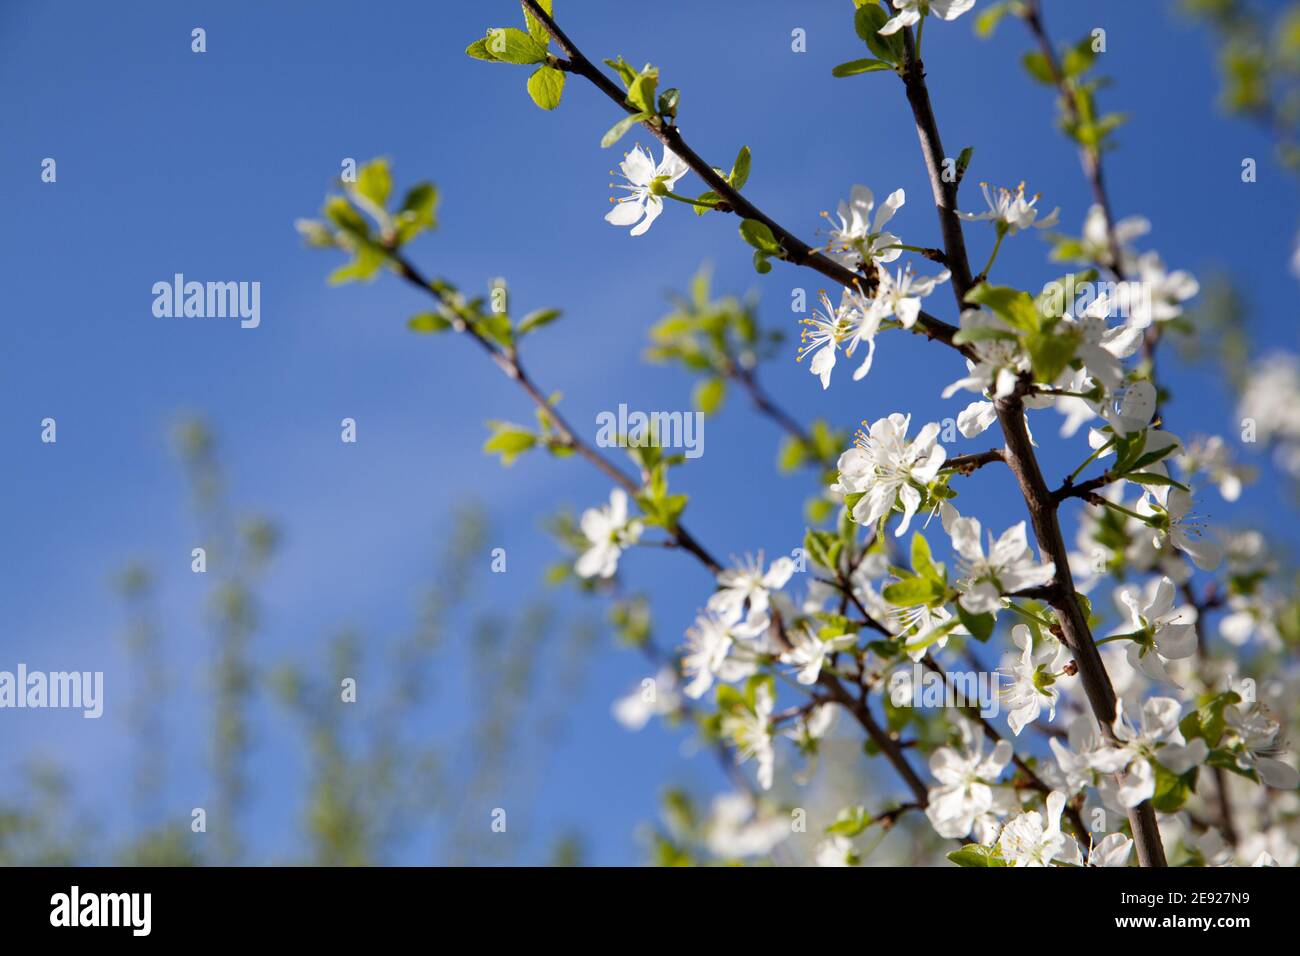 Branch with white flowers. Blooming cherry. Cherry tree with white flowers in spring, close-up. Sunny weather and blossoming trees in spring. Stock Photo